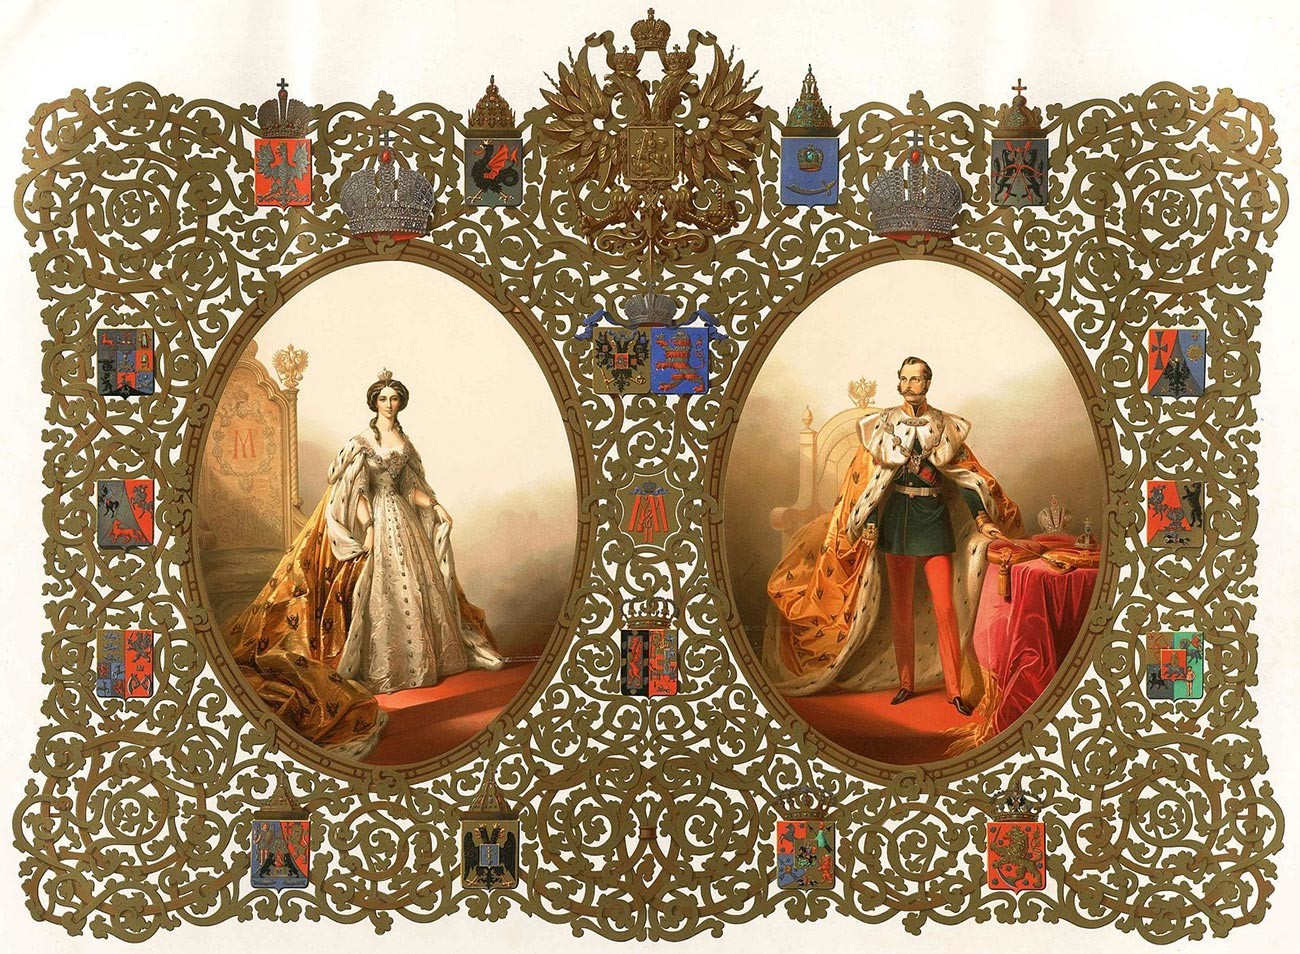 Portrait of Their Imperial Majesties